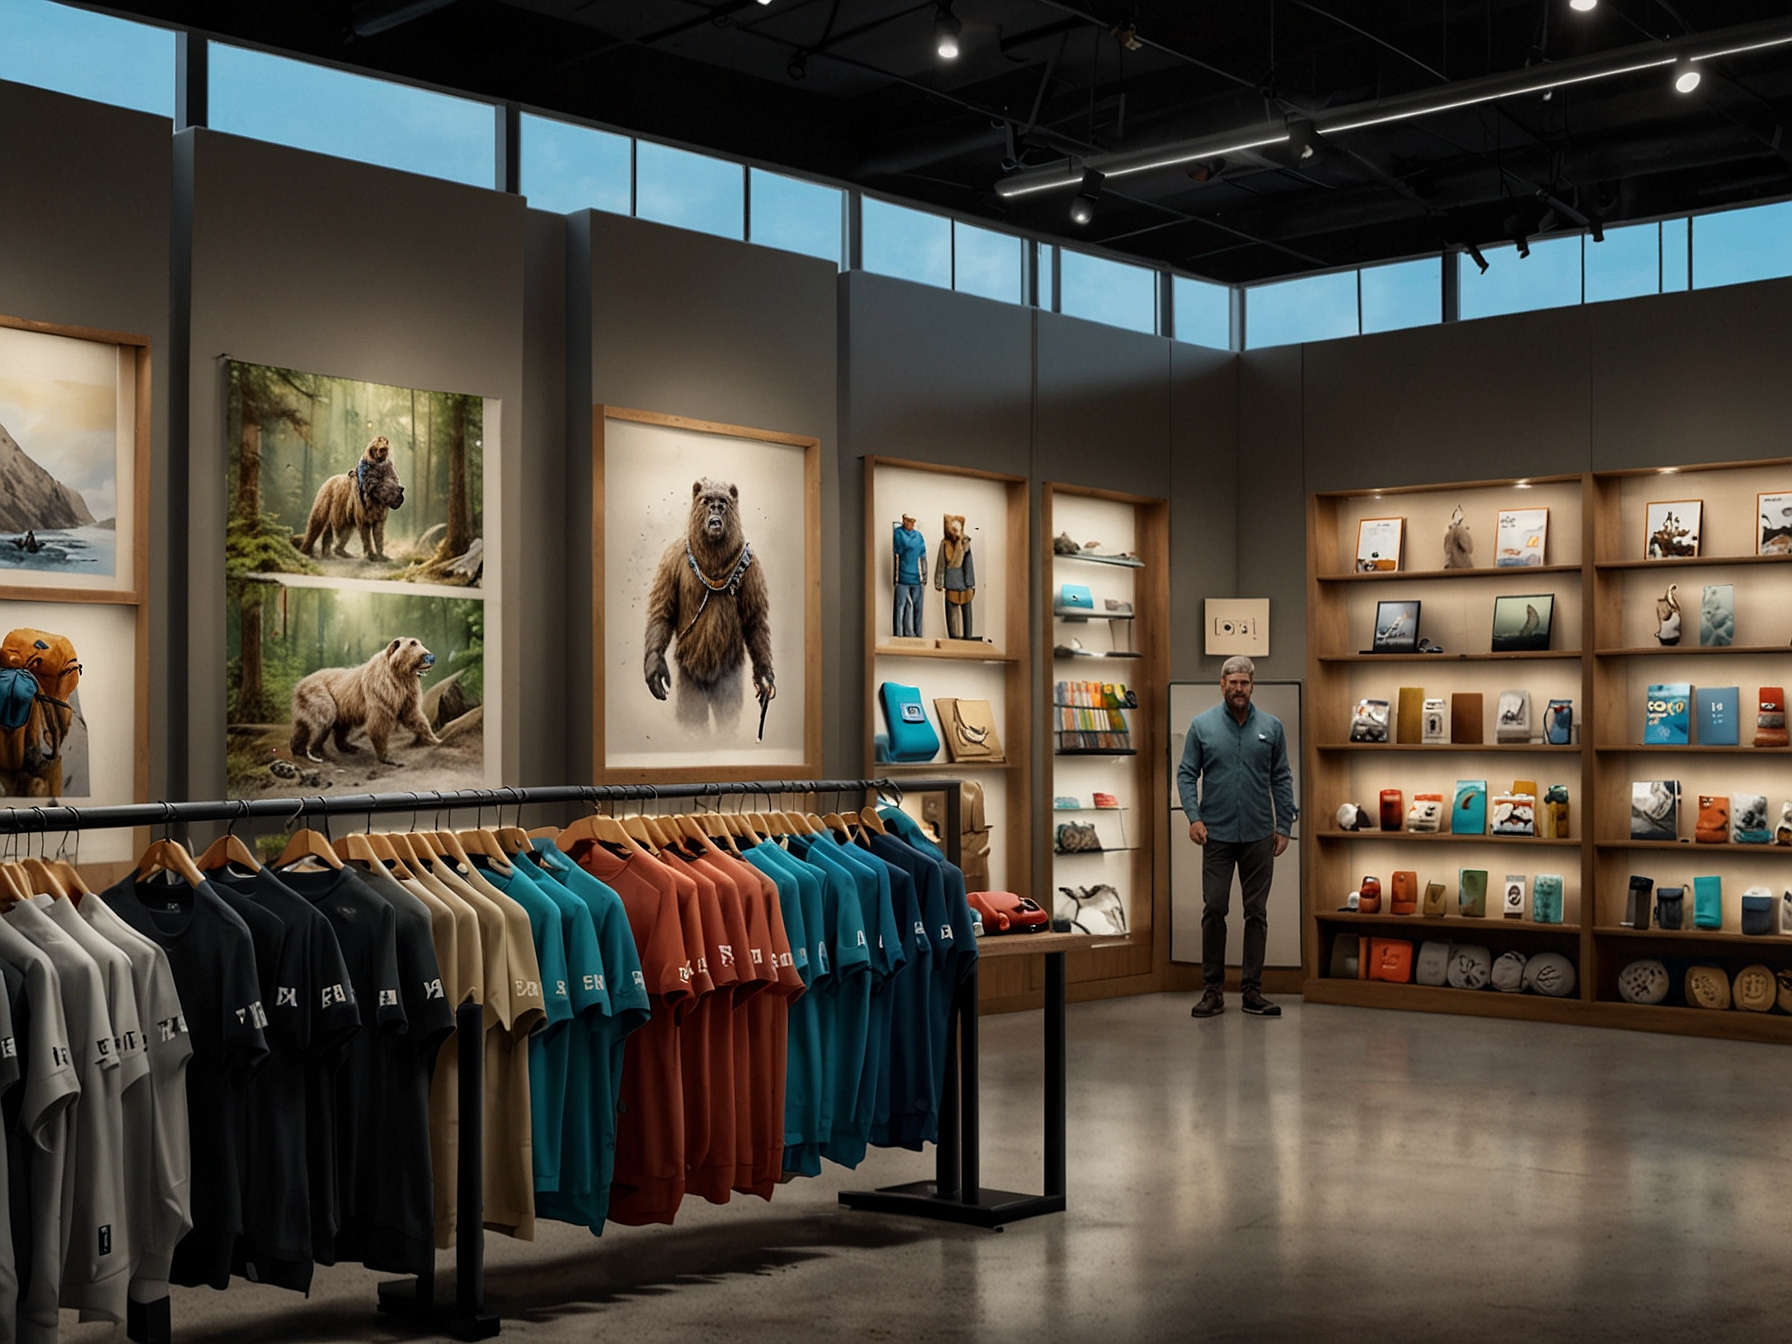 YETI's products displayed in a retail store, highlighting the brand's expanded distribution channels and accessibility. The image captures various outdoor enthusiasts exploring the premium offerings.